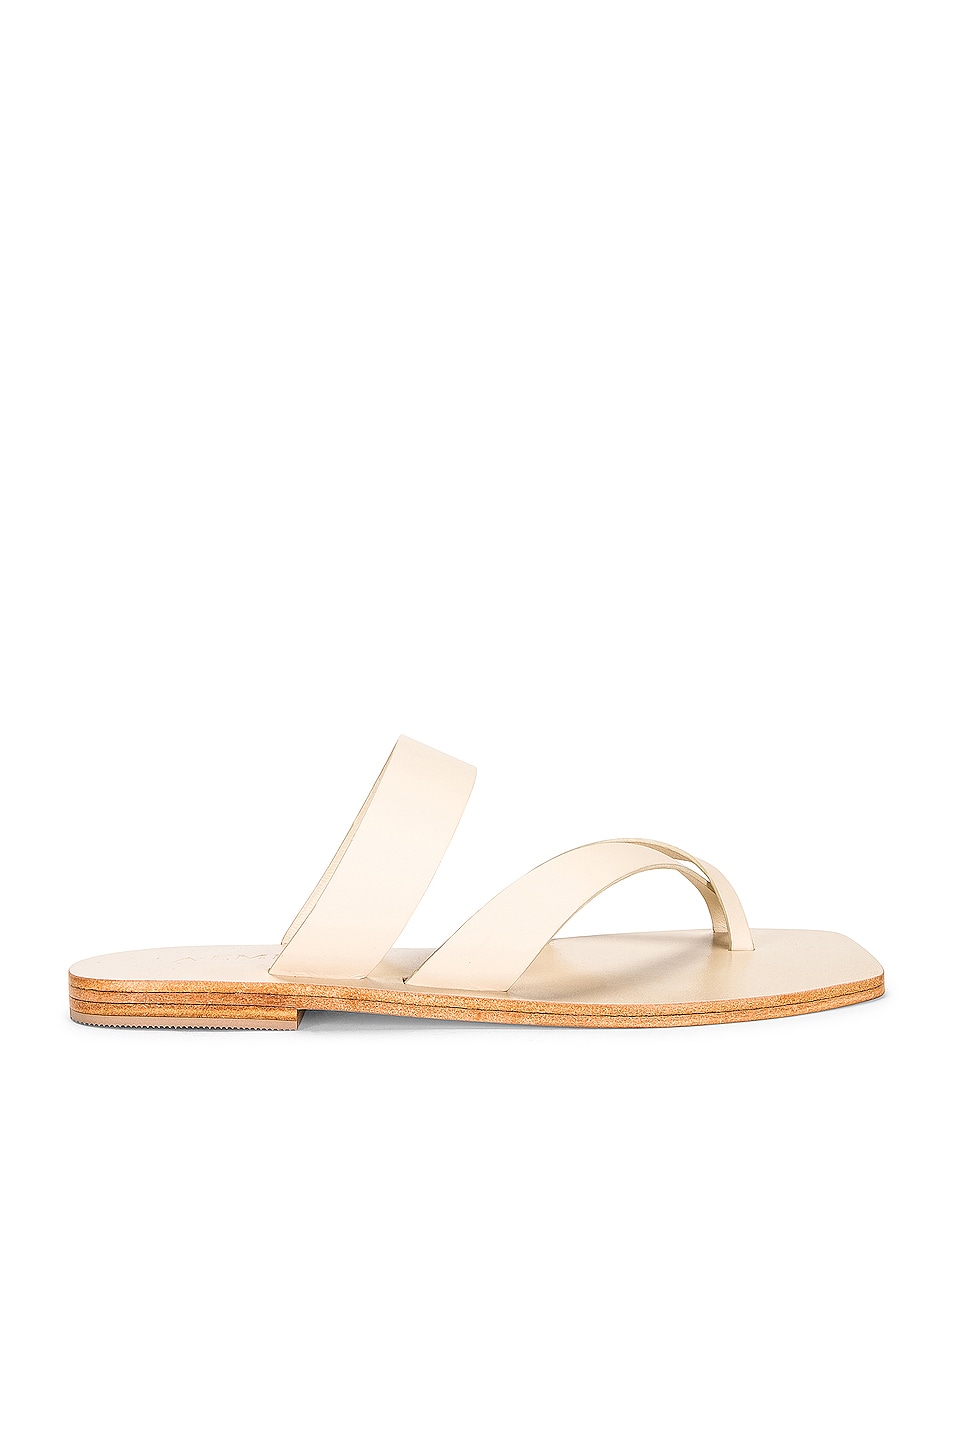 Image 1 of A.EMERY Carter Sandal in Nougat